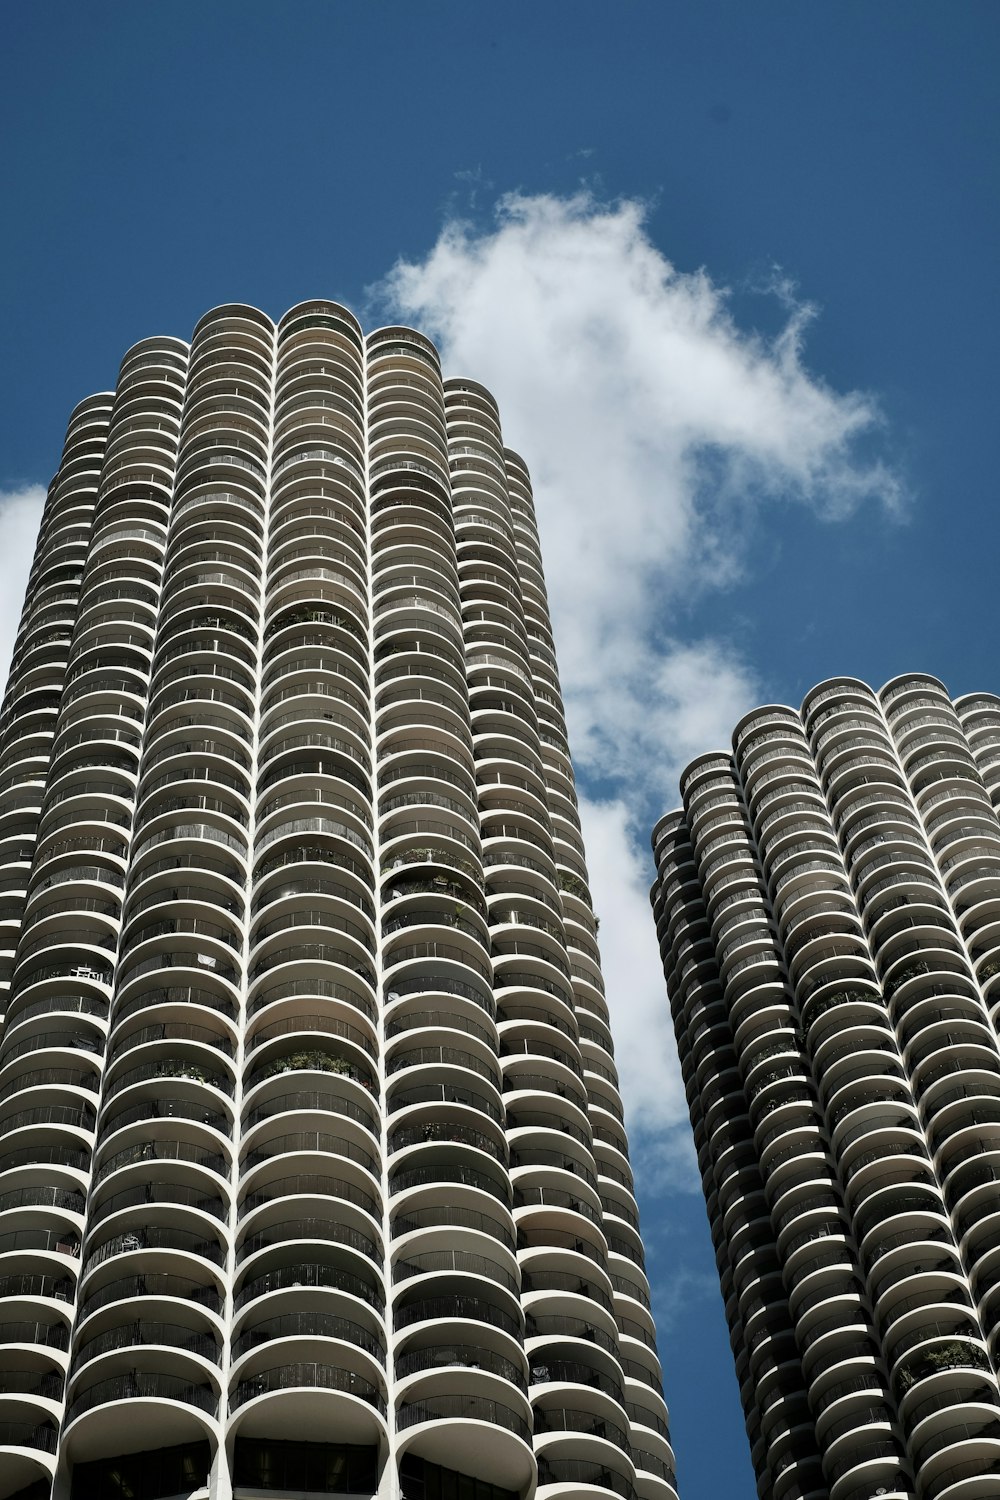 two tall buildings with circular balconies against a blue sky